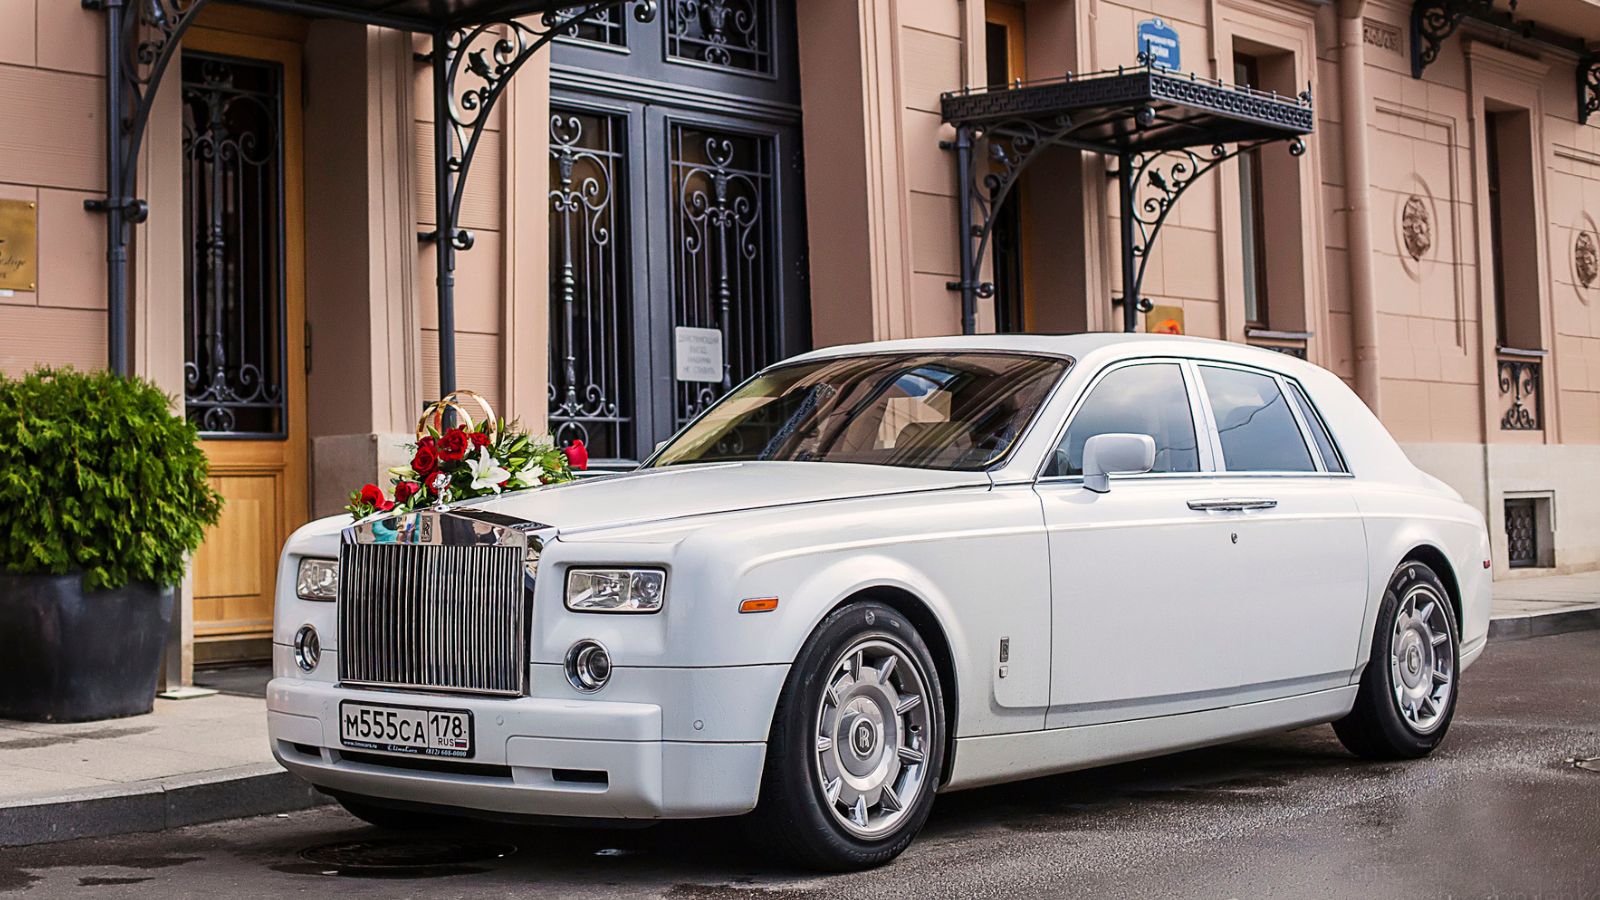 12 'Rich People' Things Normal People Wish They Could Experience